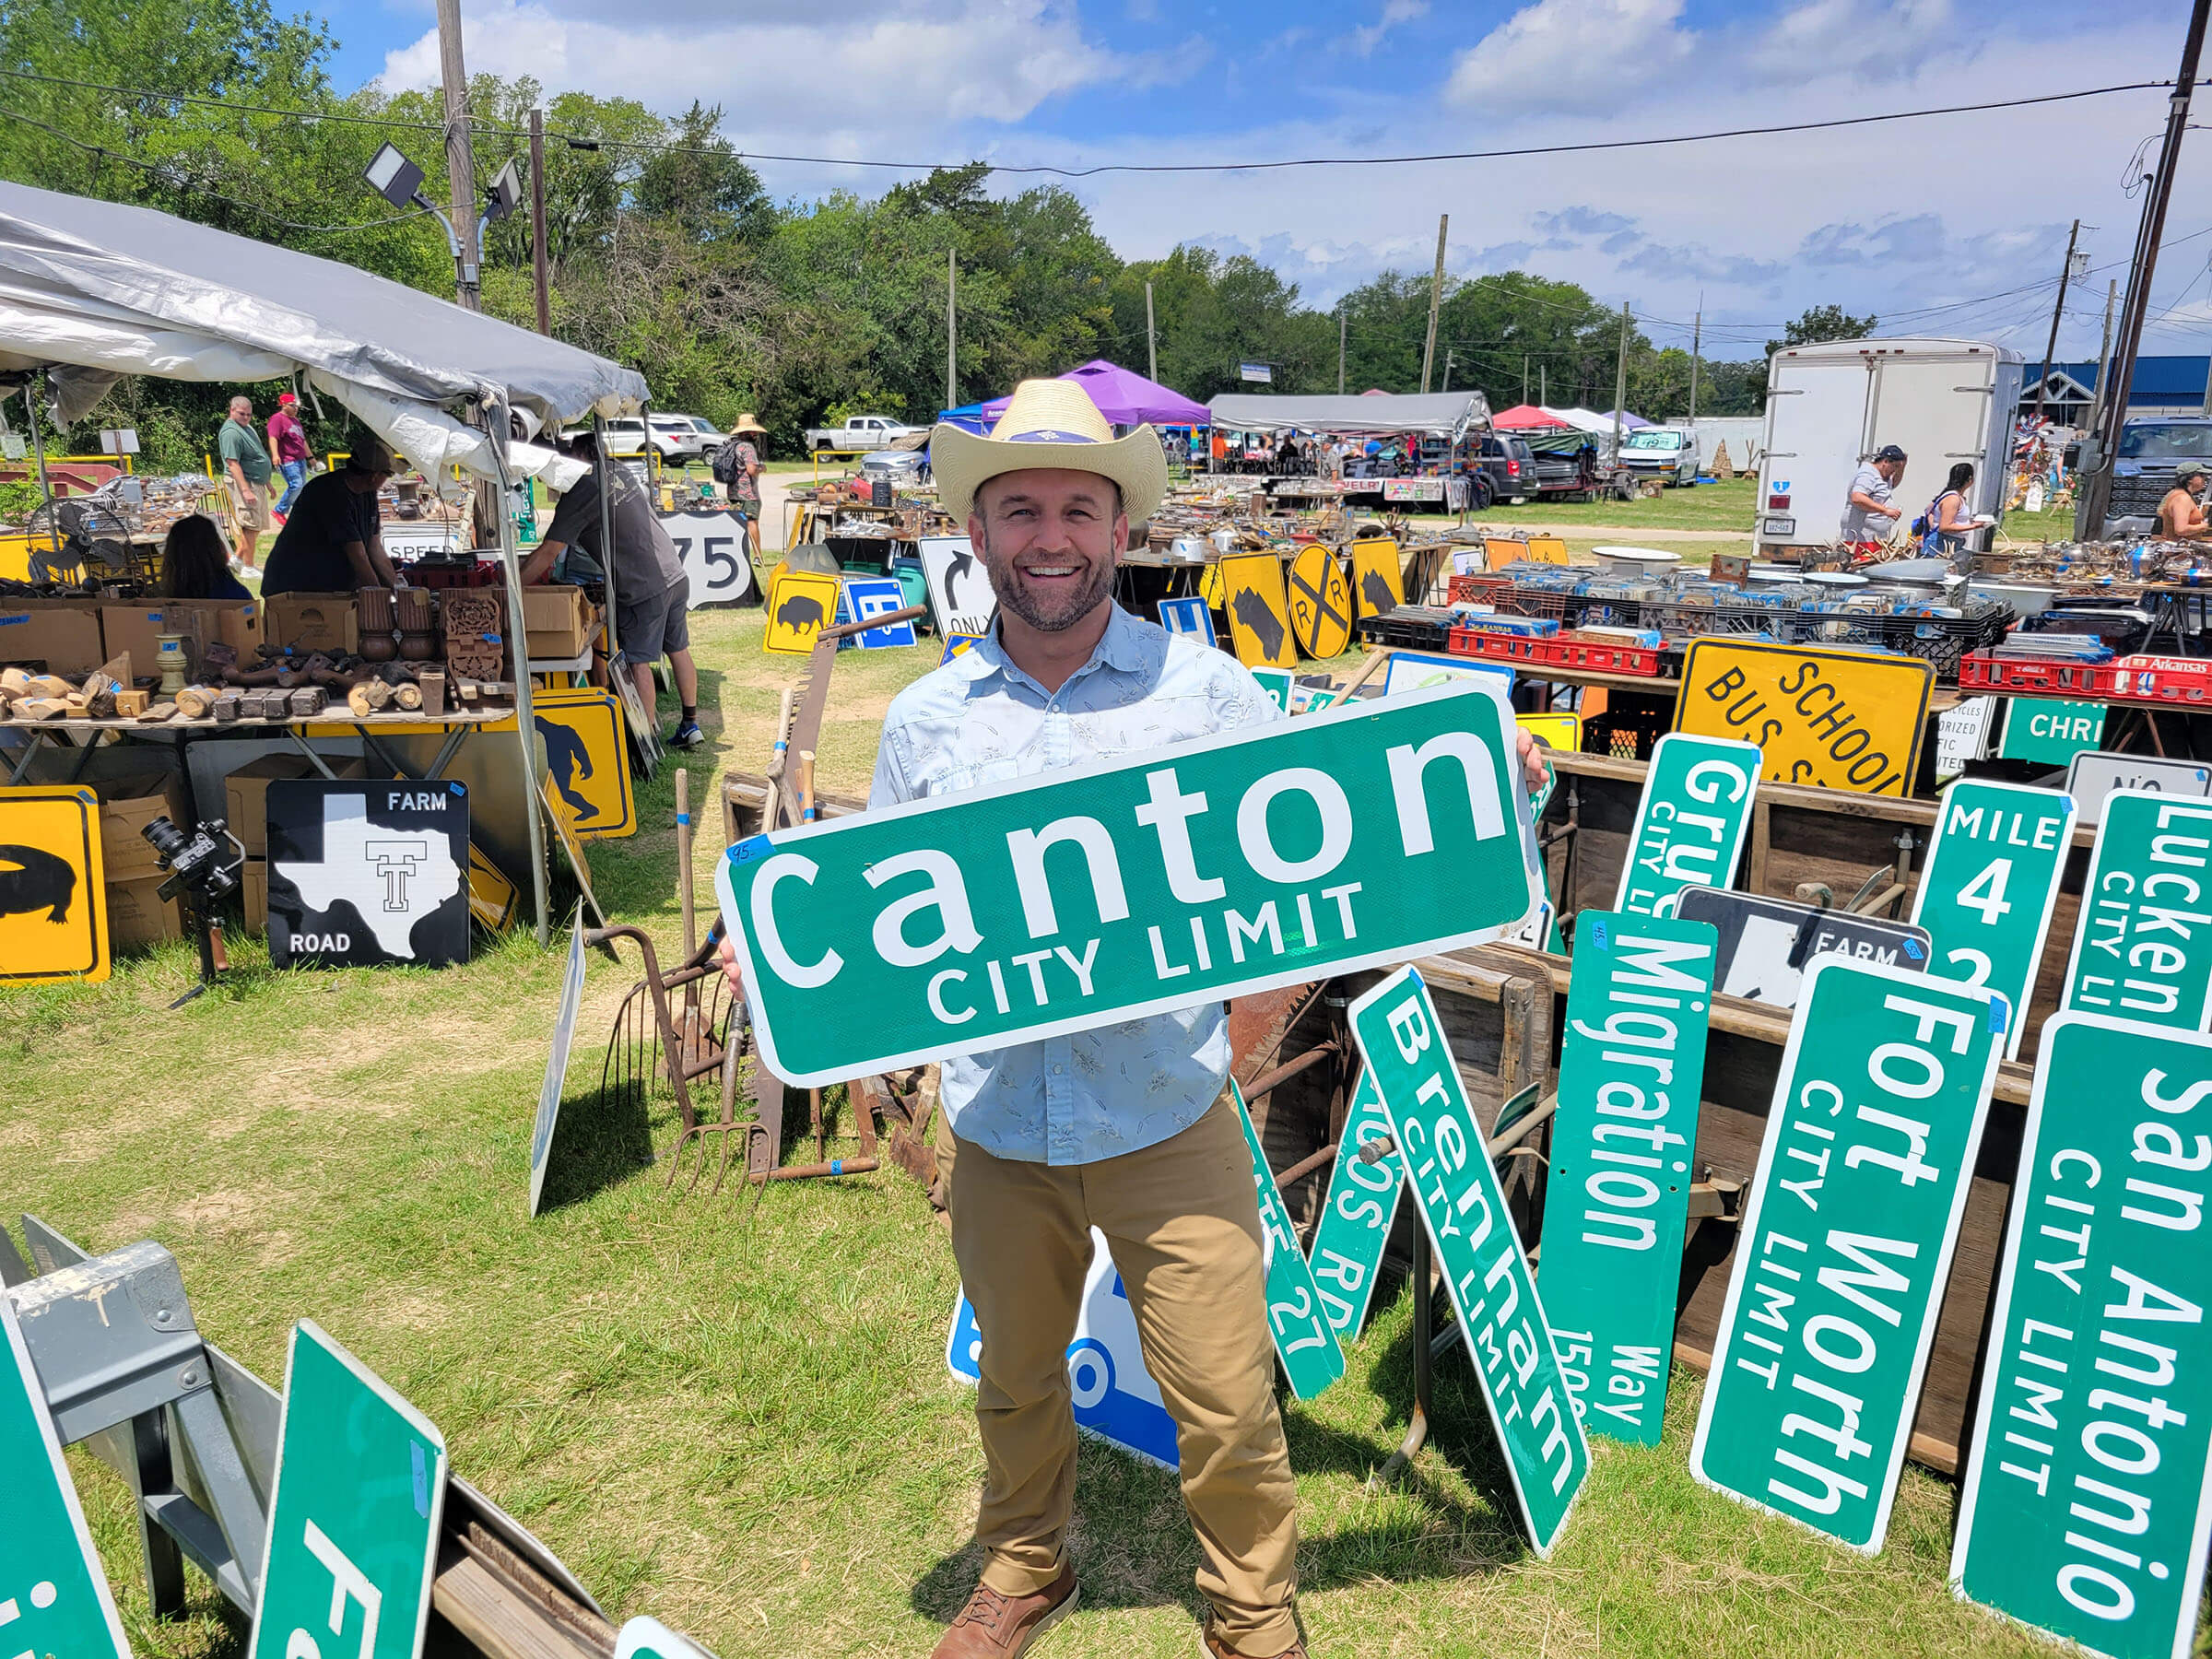 A man holds a large green sign reading "Canton City Limit"